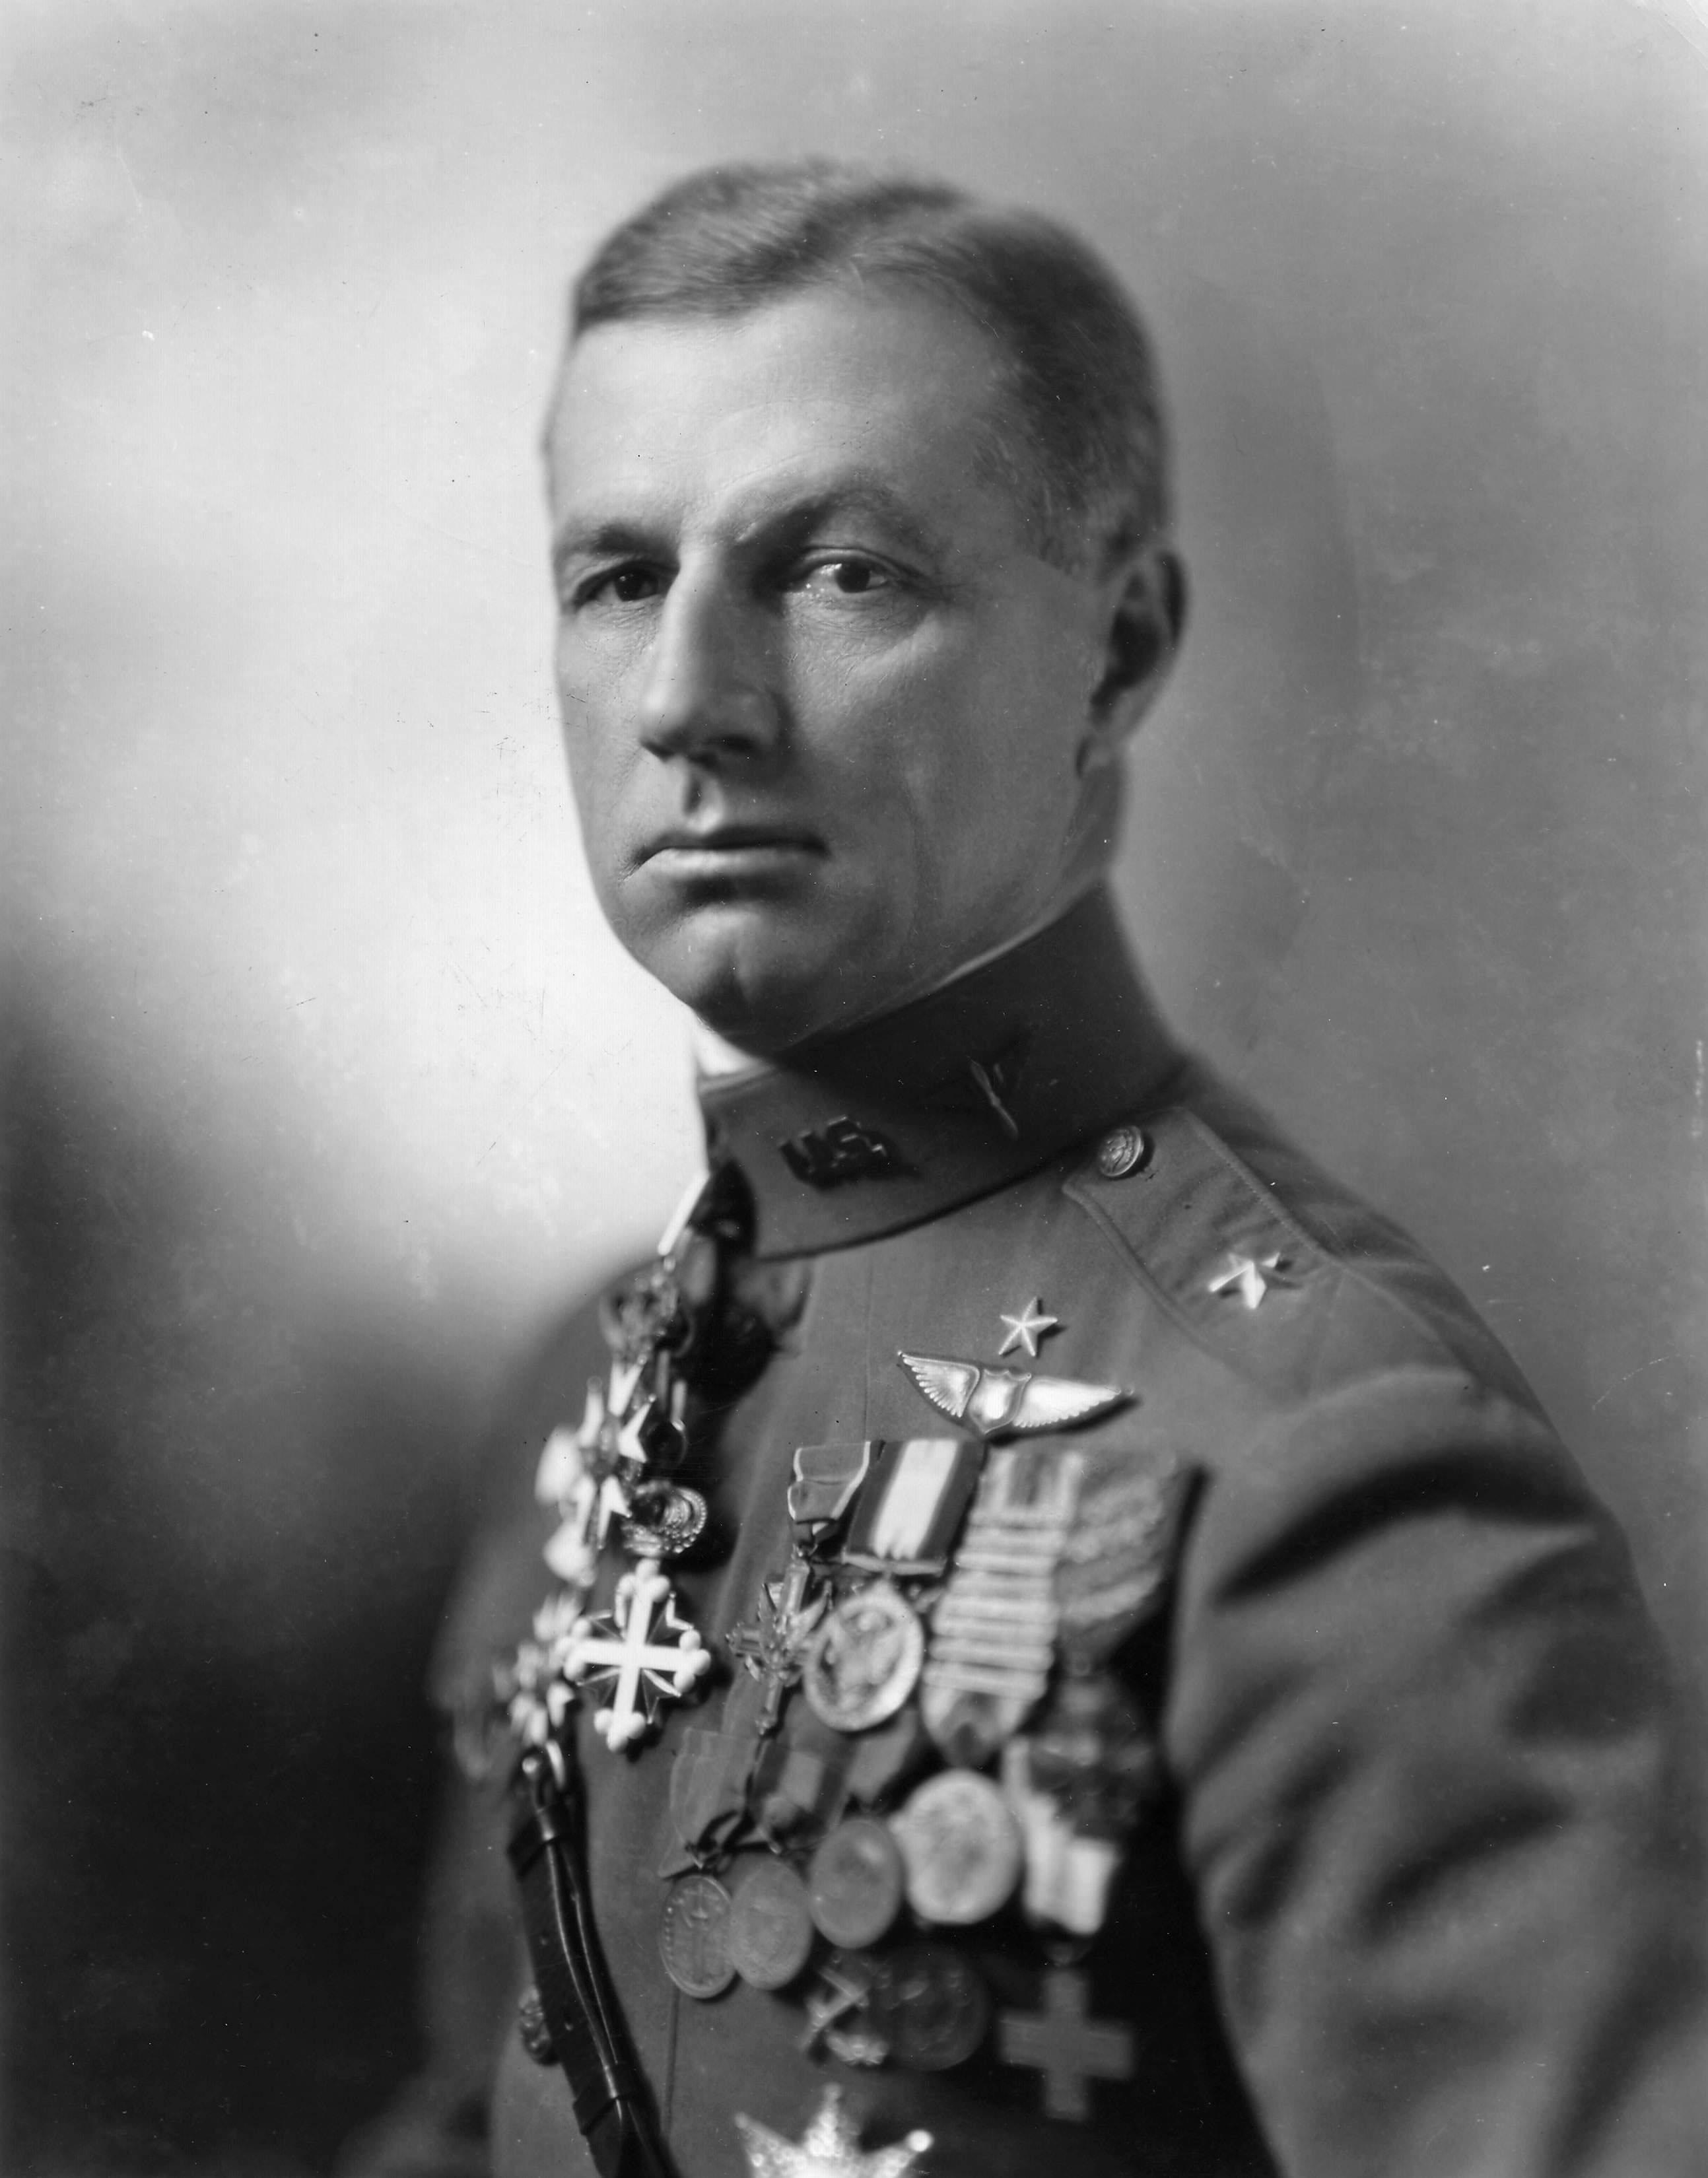 General William “Billy” Mitchell. Image courtesy of Wikimedia Commons.